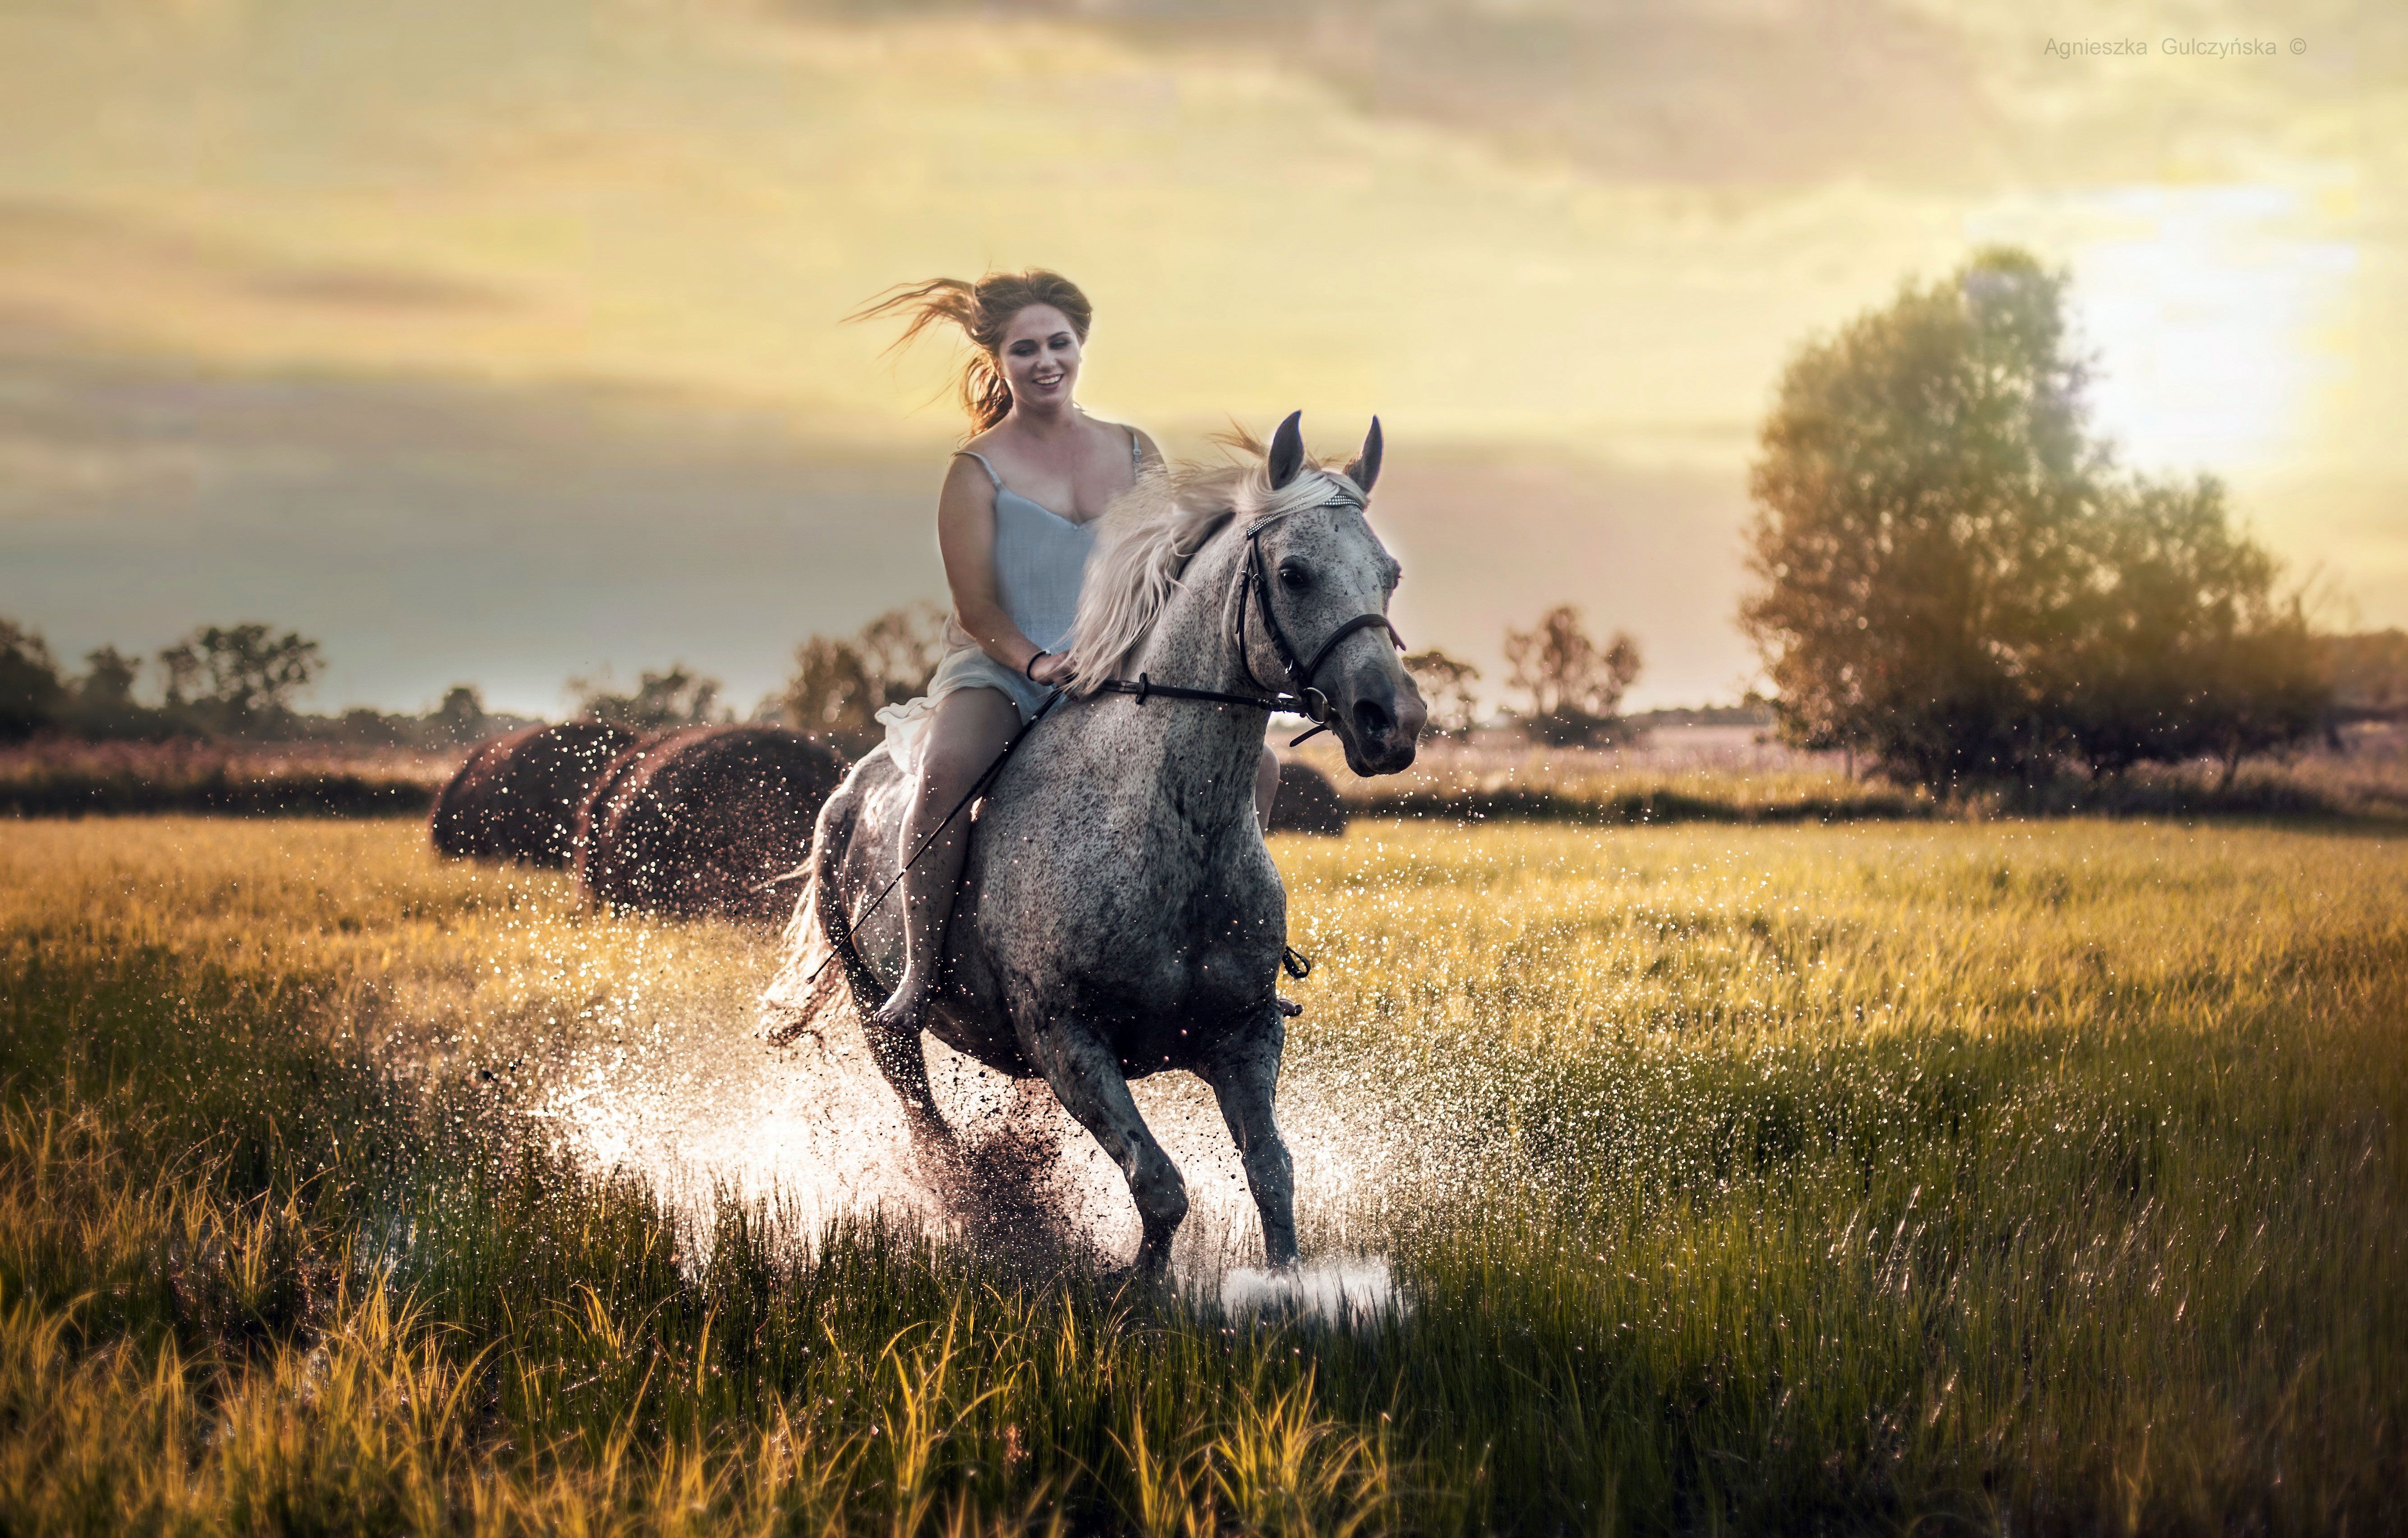 Girls Riding Horse Wallpapers Wallpaper Cave